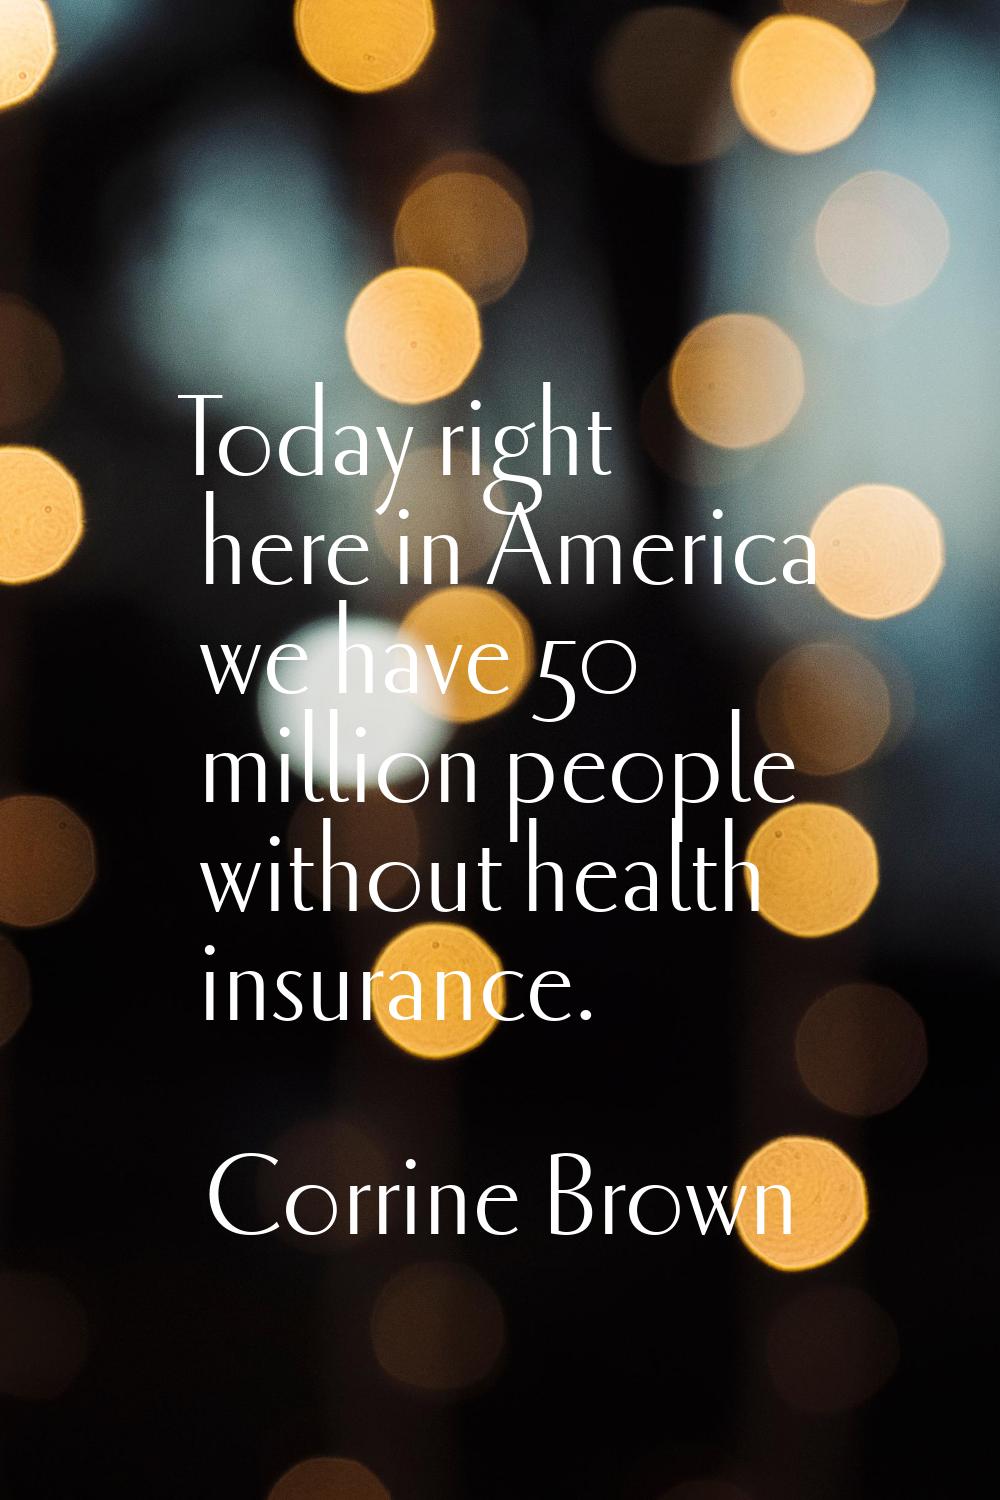 Today right here in America we have 50 million people without health insurance.